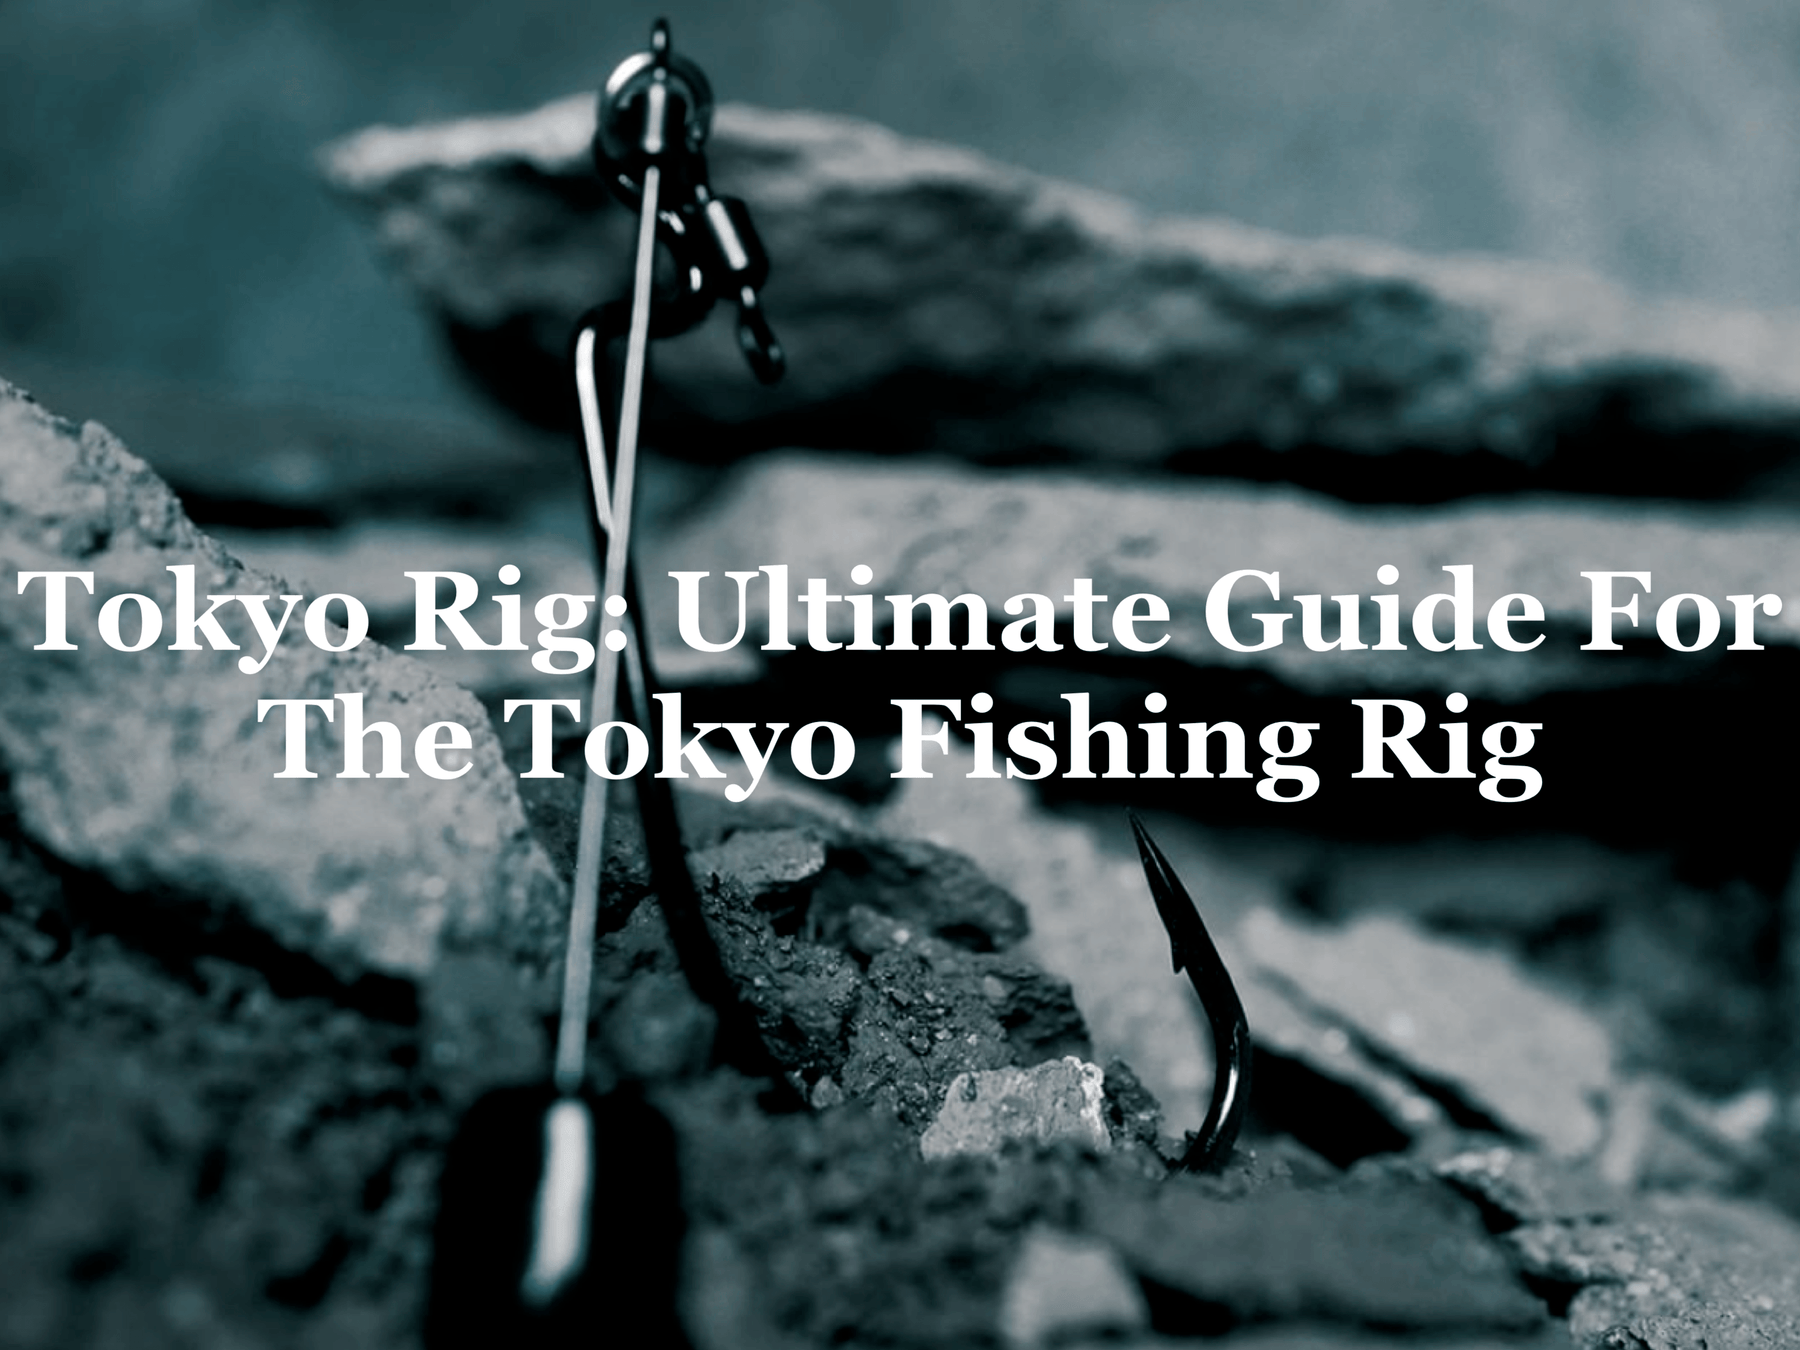 Tokyo Rig: Ultimate Guide For The Tokyo Fishing Rig